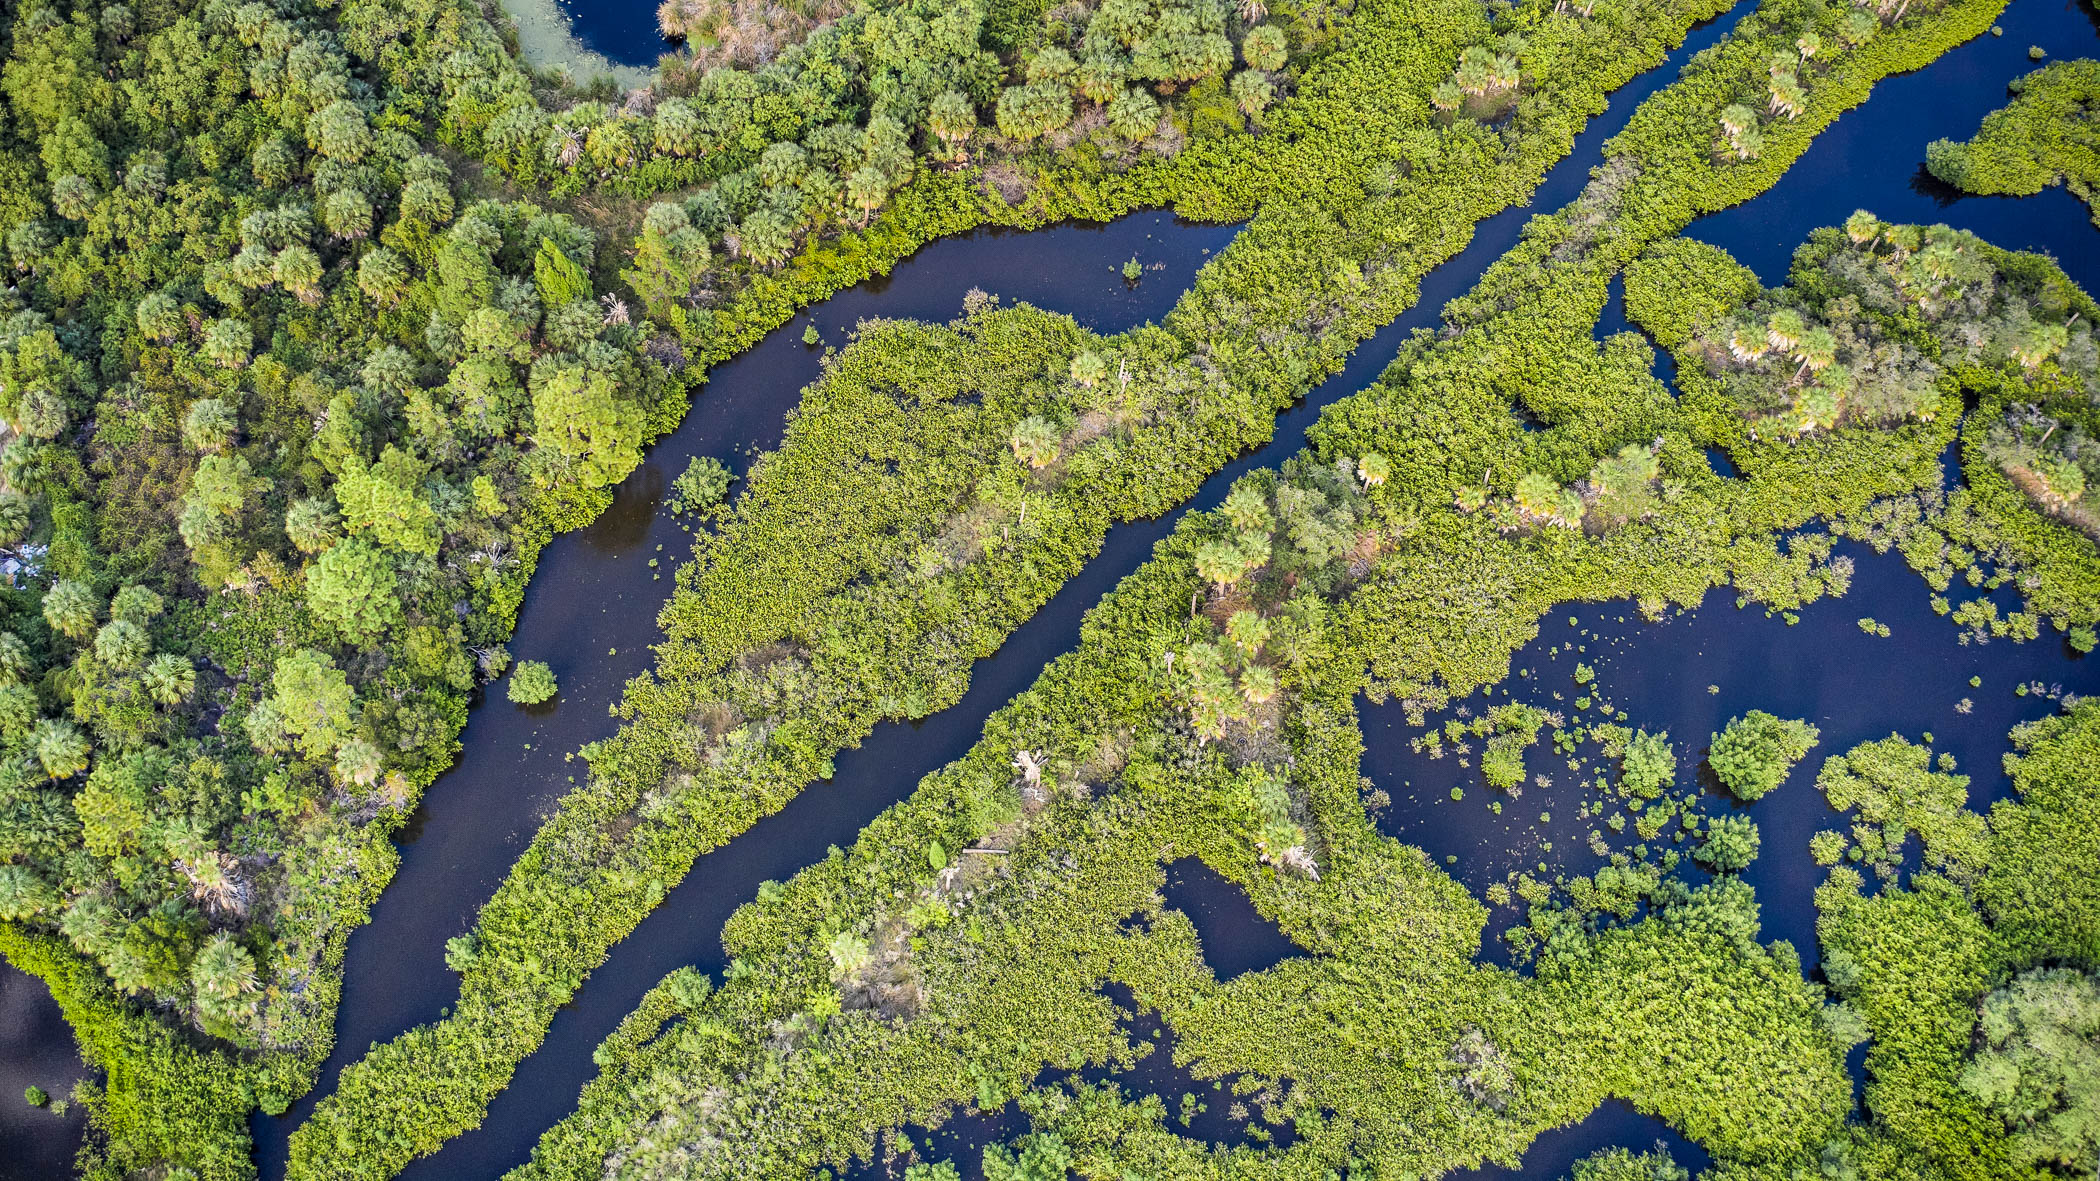 Florida Wetlands Captured from Drone Photographer